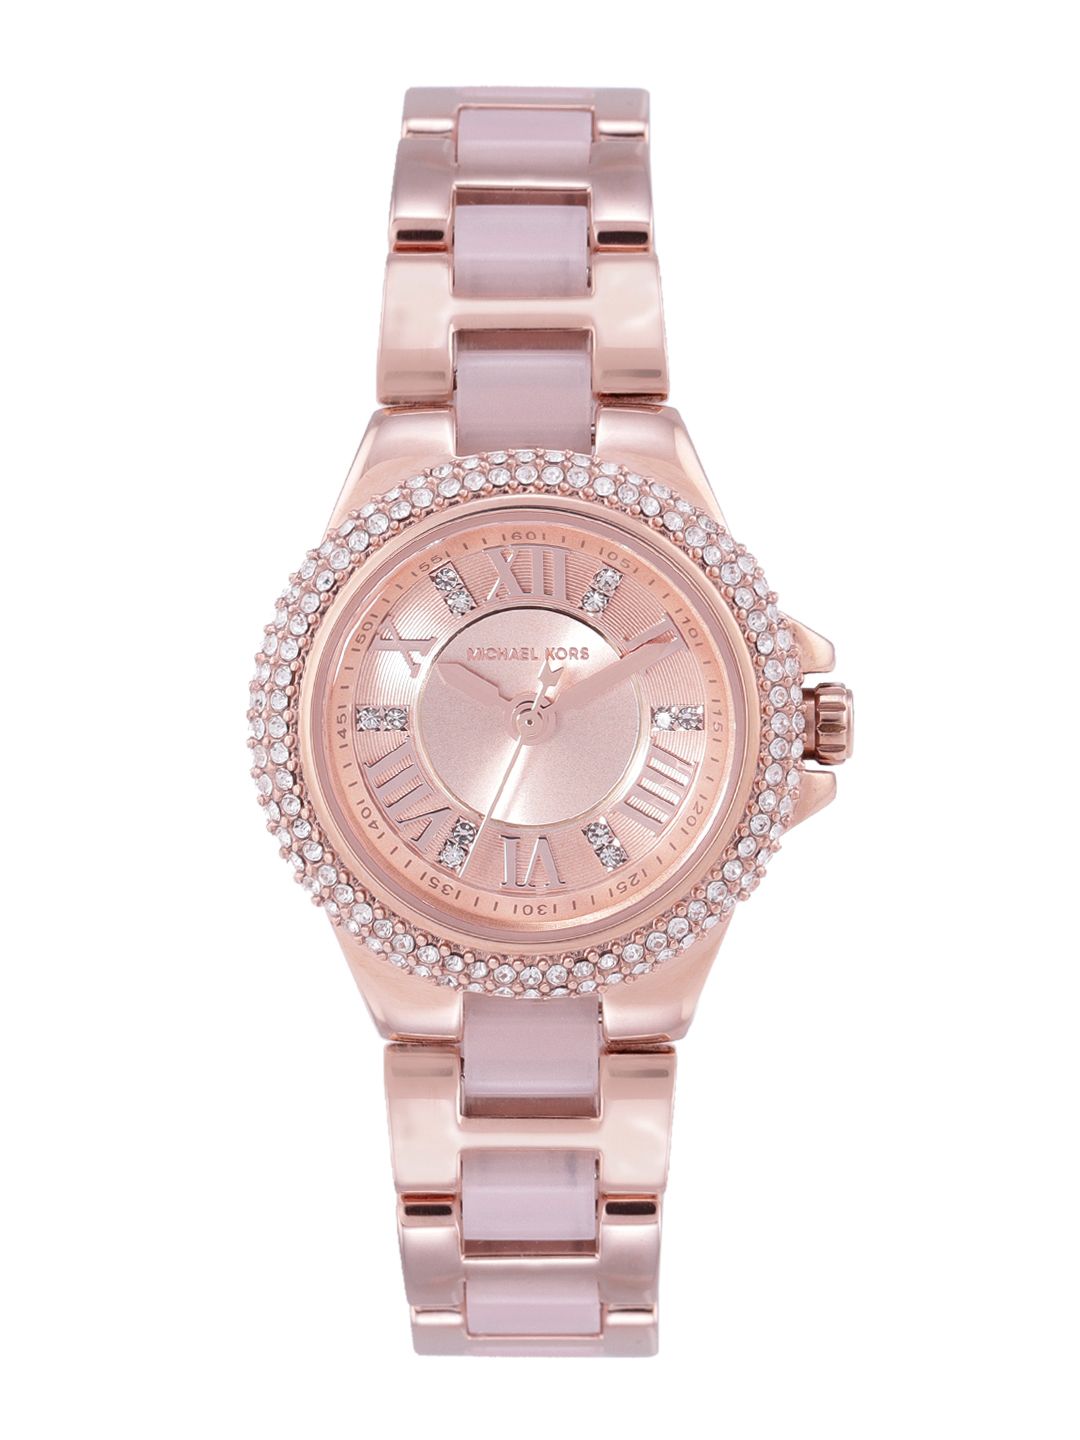 Michael Kors Women Rose Gold-Toned Dial & Stainless Steel Straps Analogue Watch Price in India